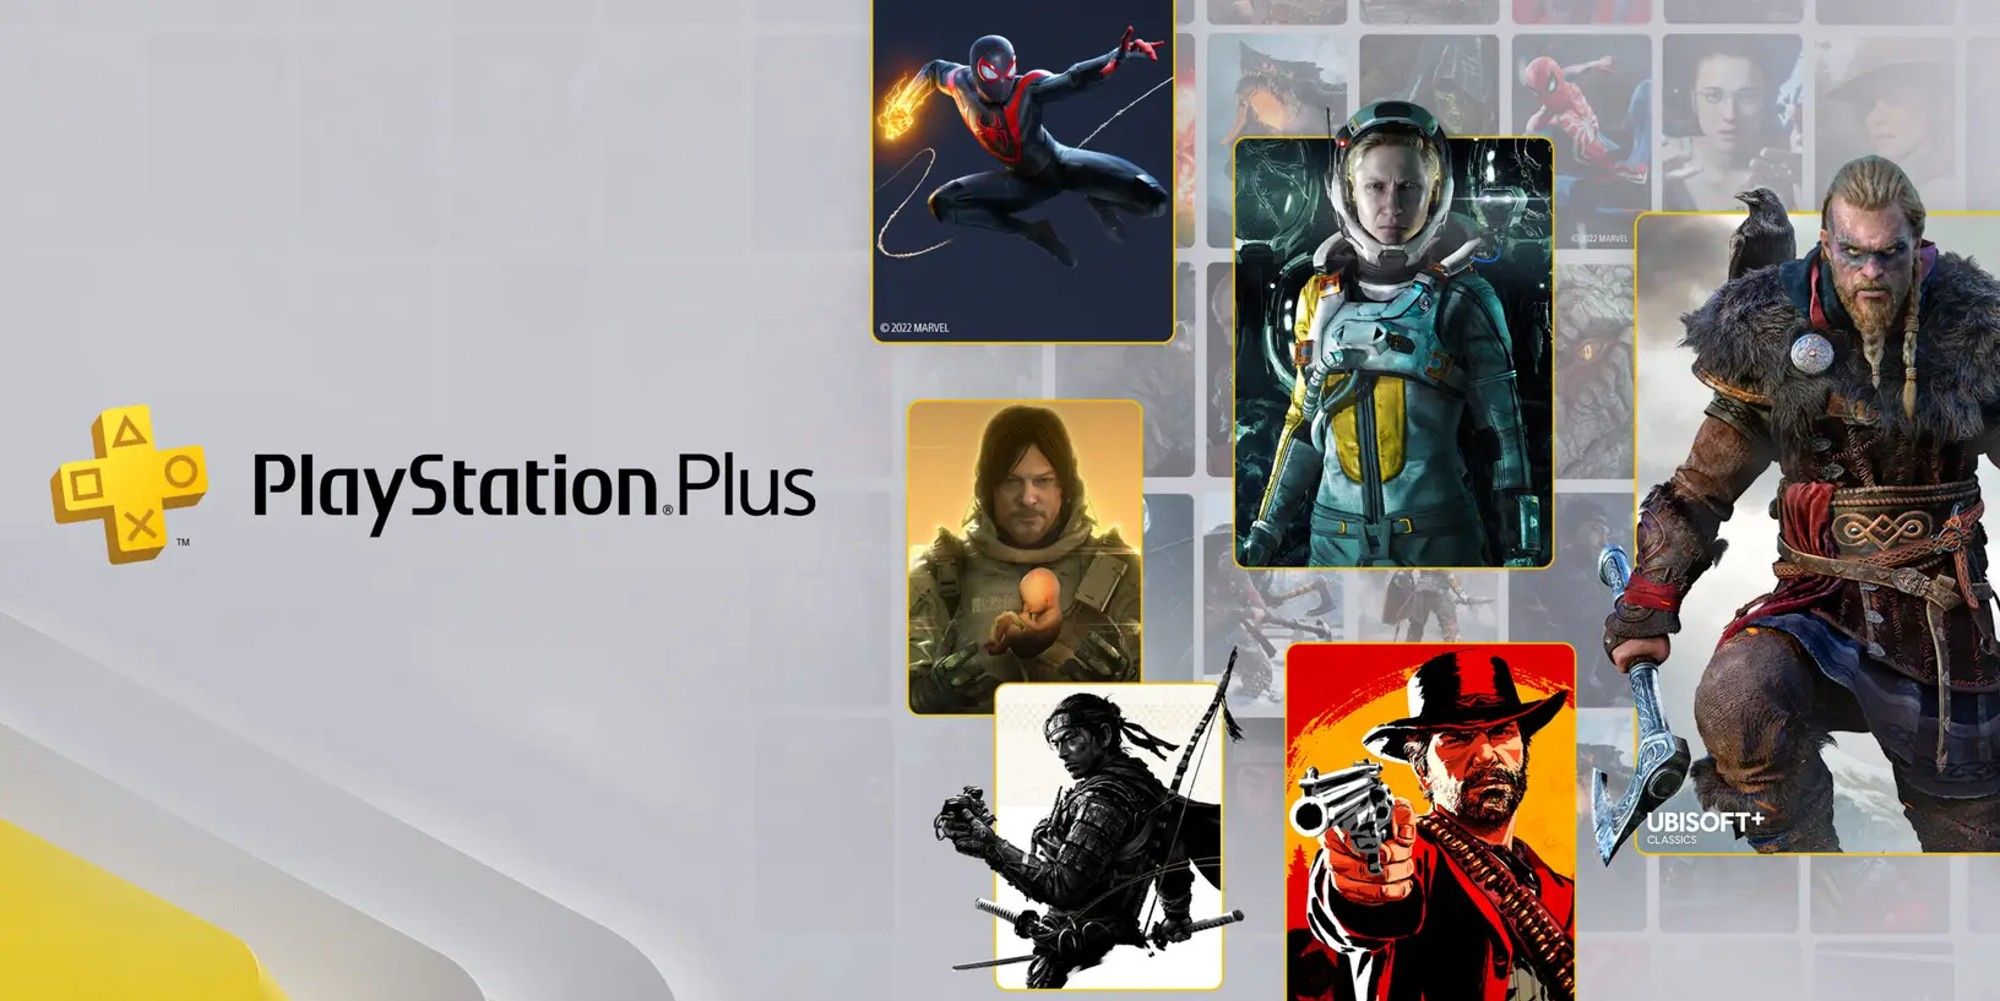 ps plus collection